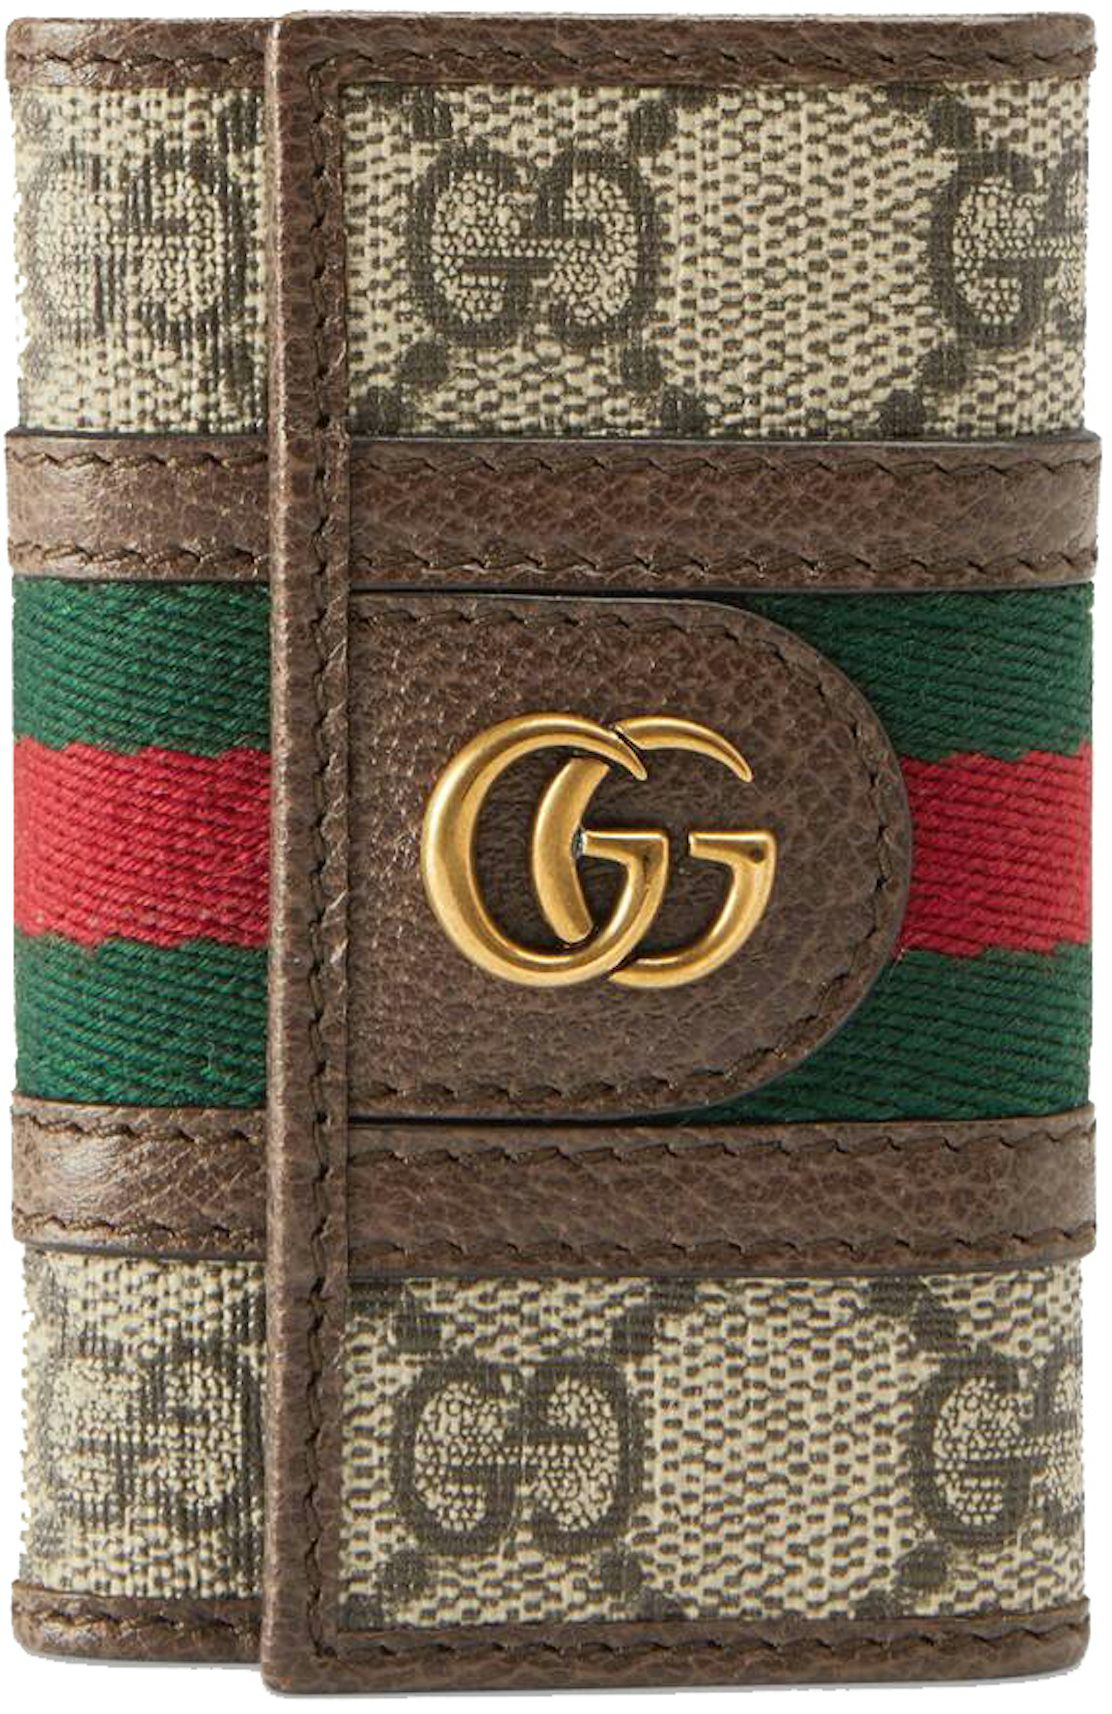 Gucci Ophidia key case